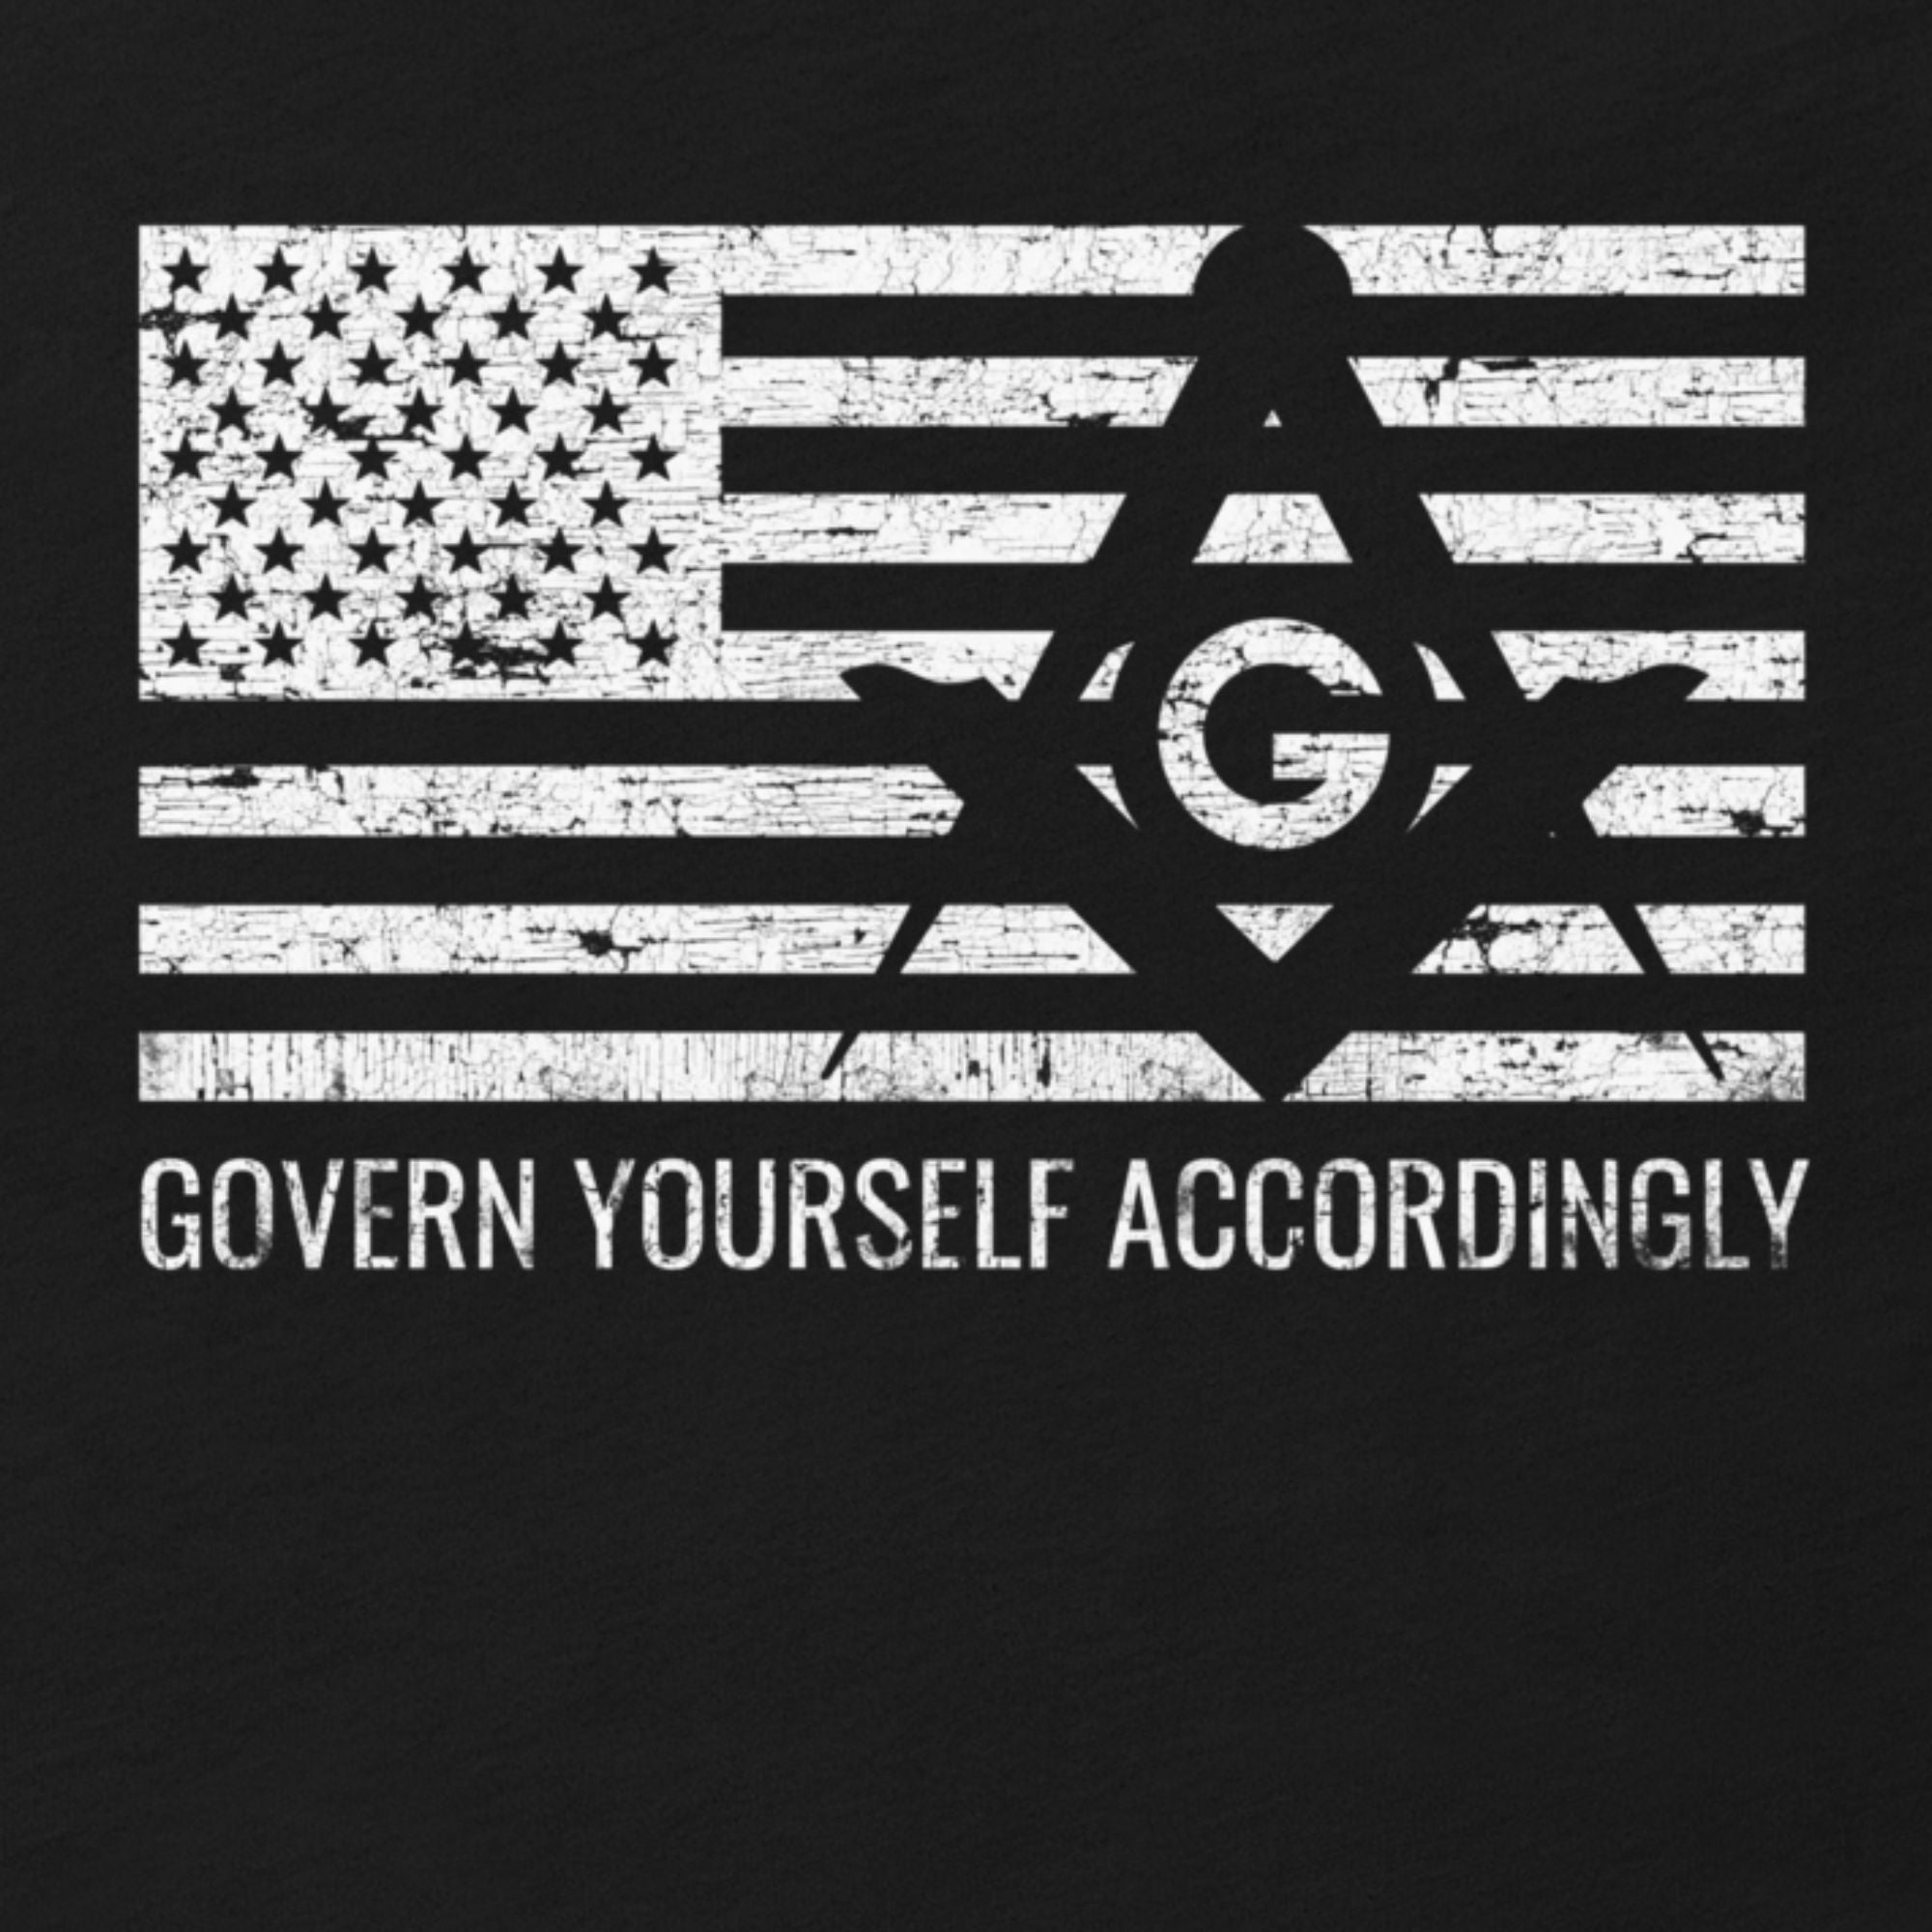 Govern Yourself Accordingly T-Shirt